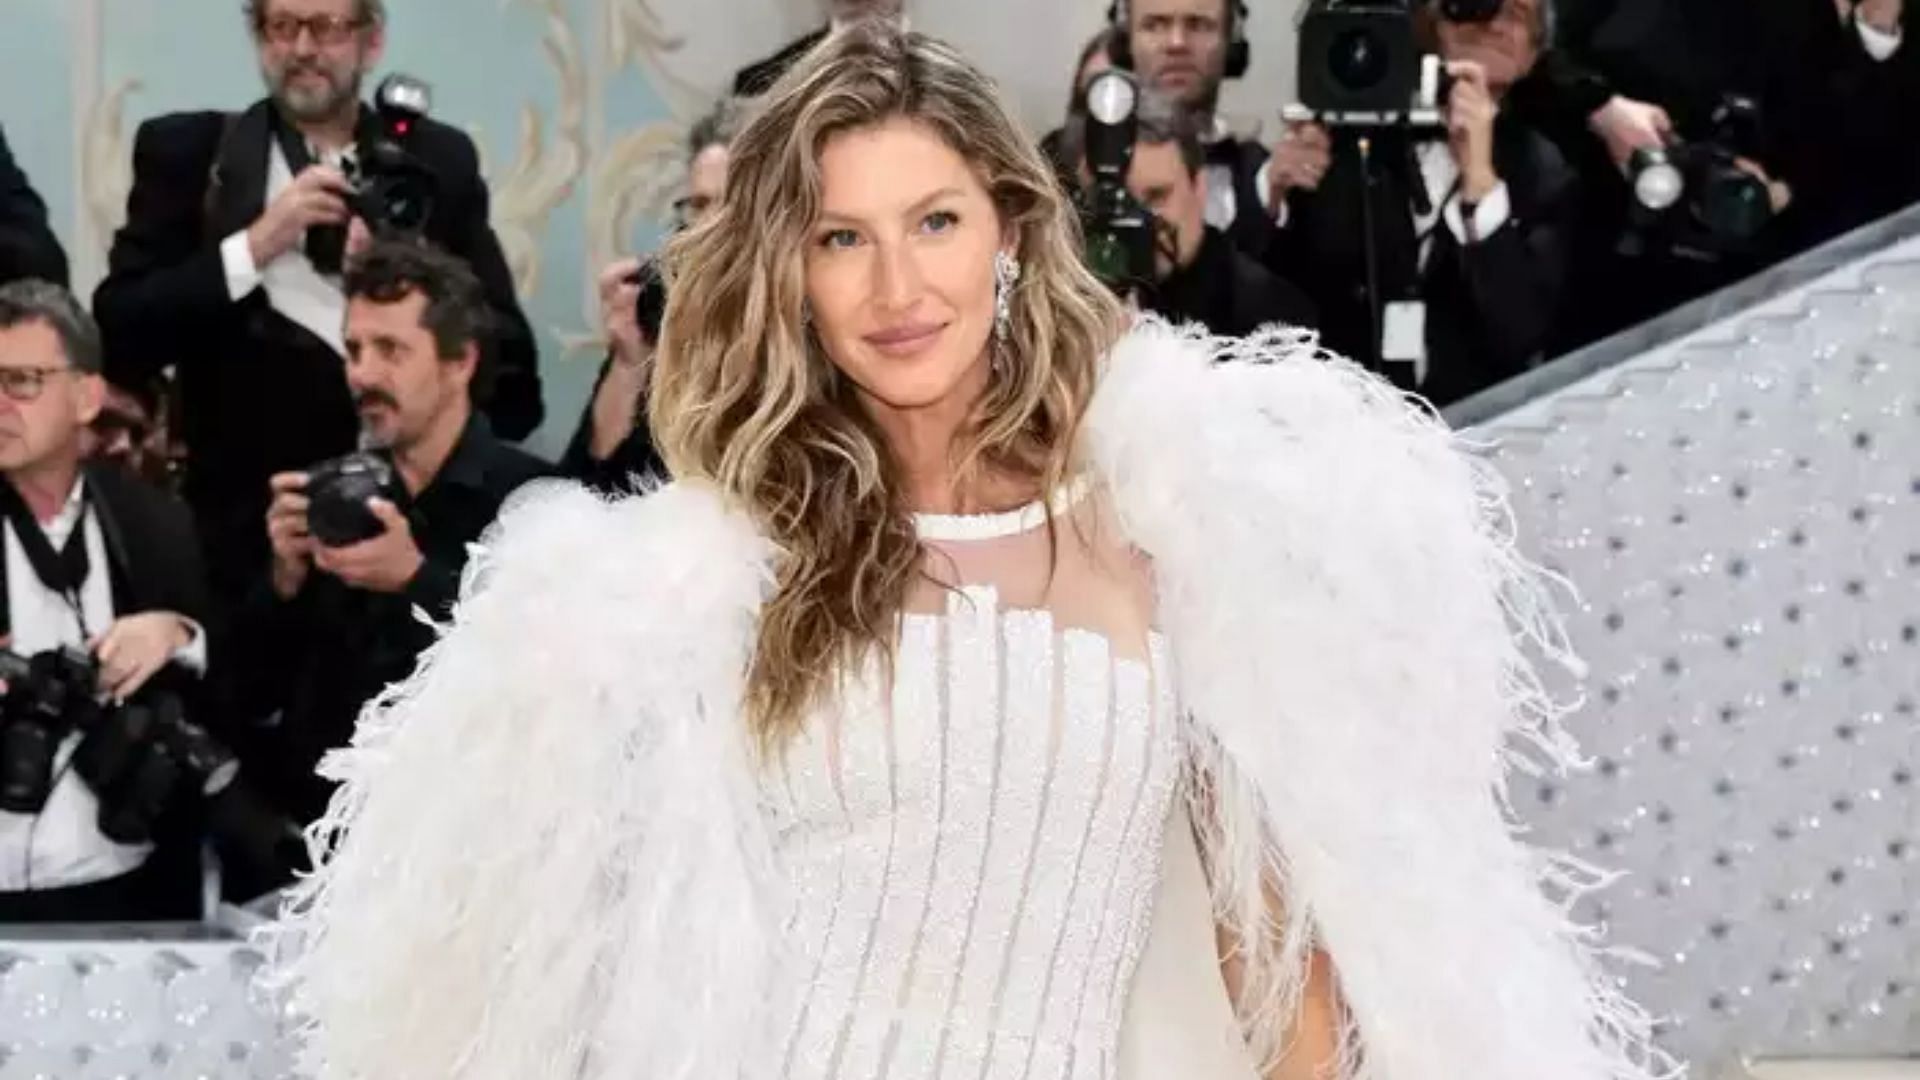 Gisele Bundchen dons stunning Chanel outfit in first Met Gala appearance post-Tom Brady breakup (Image credit: Jamie McCarthy/Getty Images)